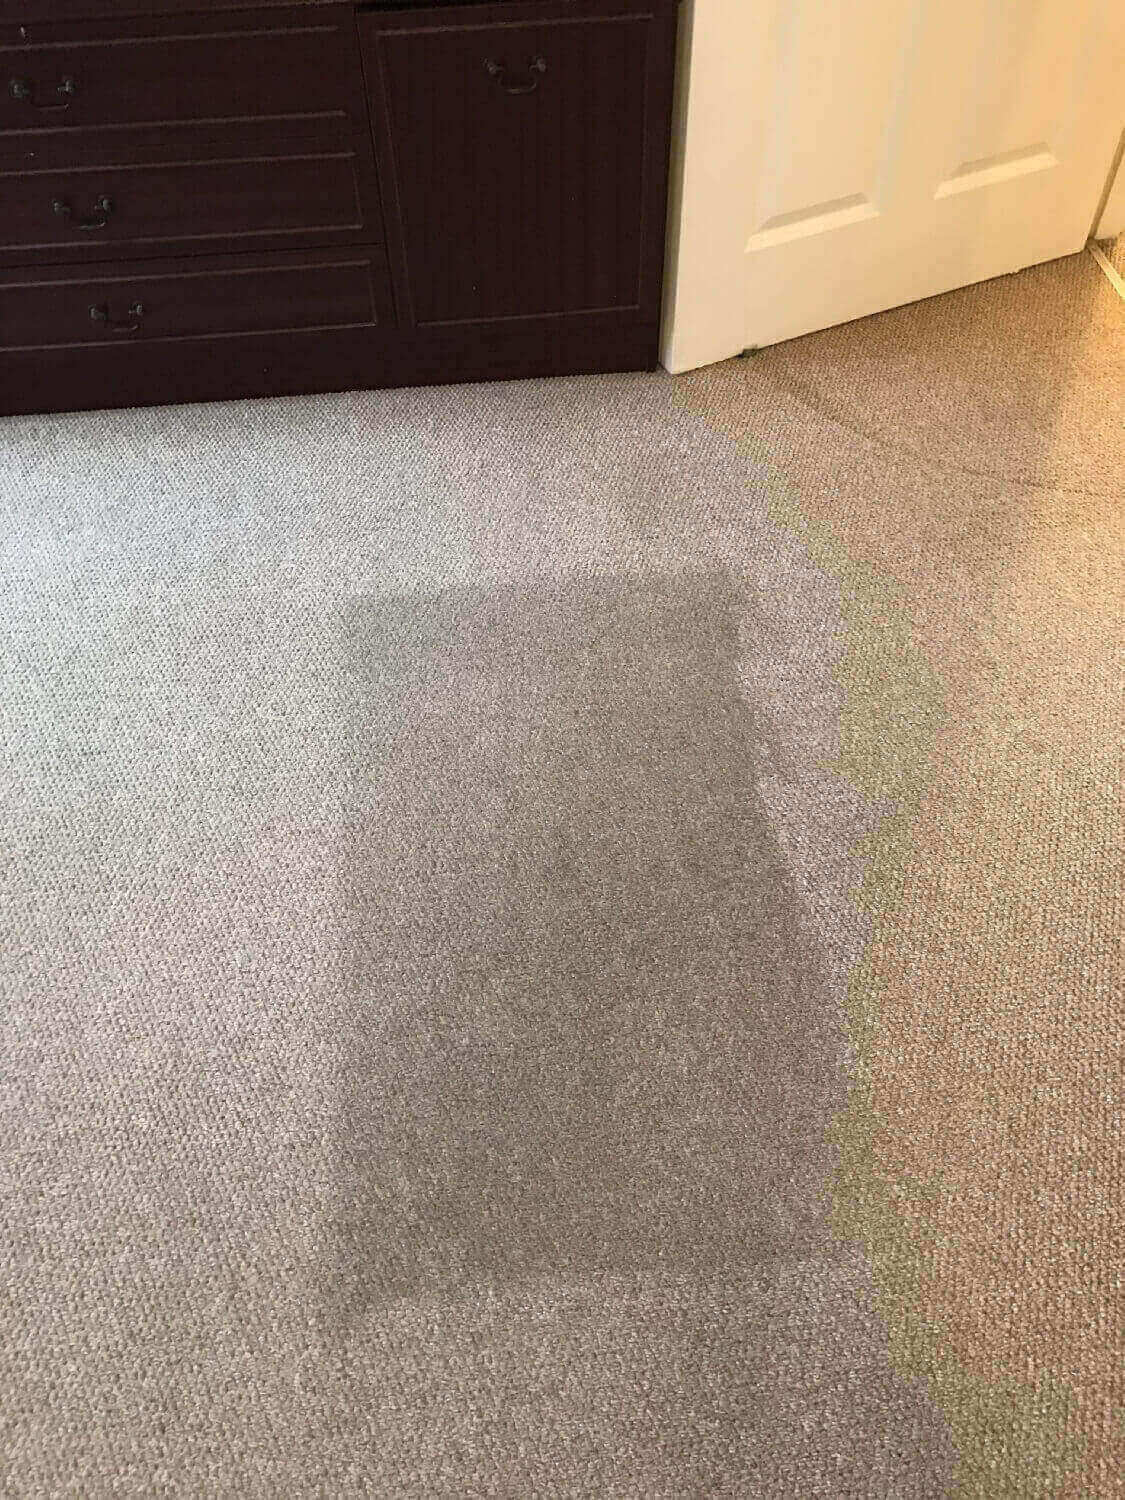 Residential Carpet Cleaning Leamington Spa